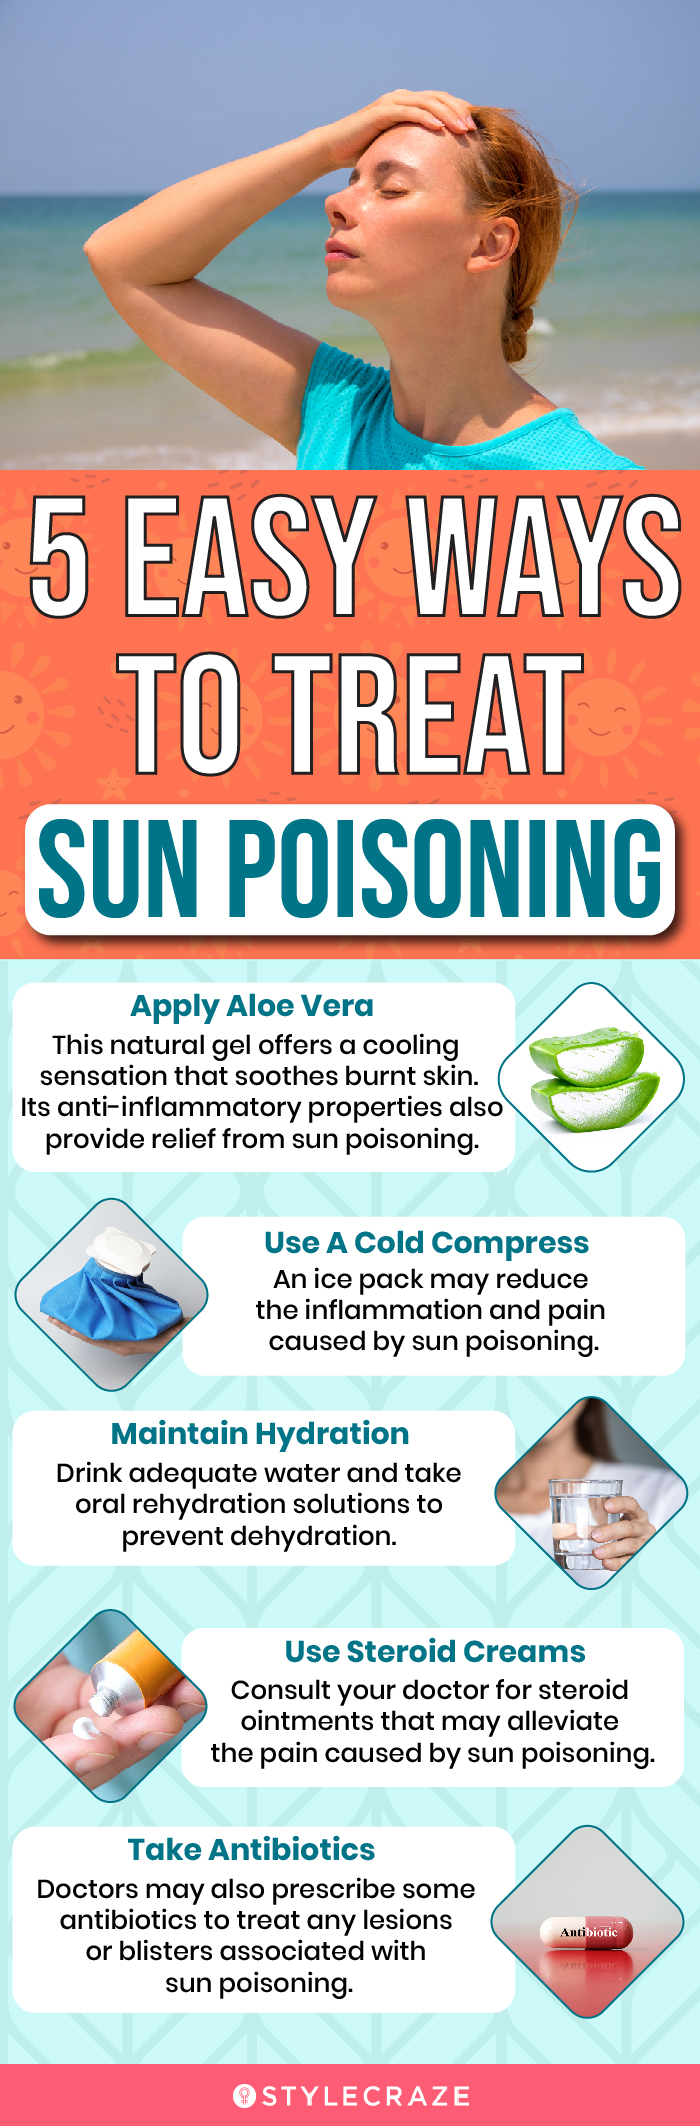 5 easy ways to treat sun poisoning (infographic)